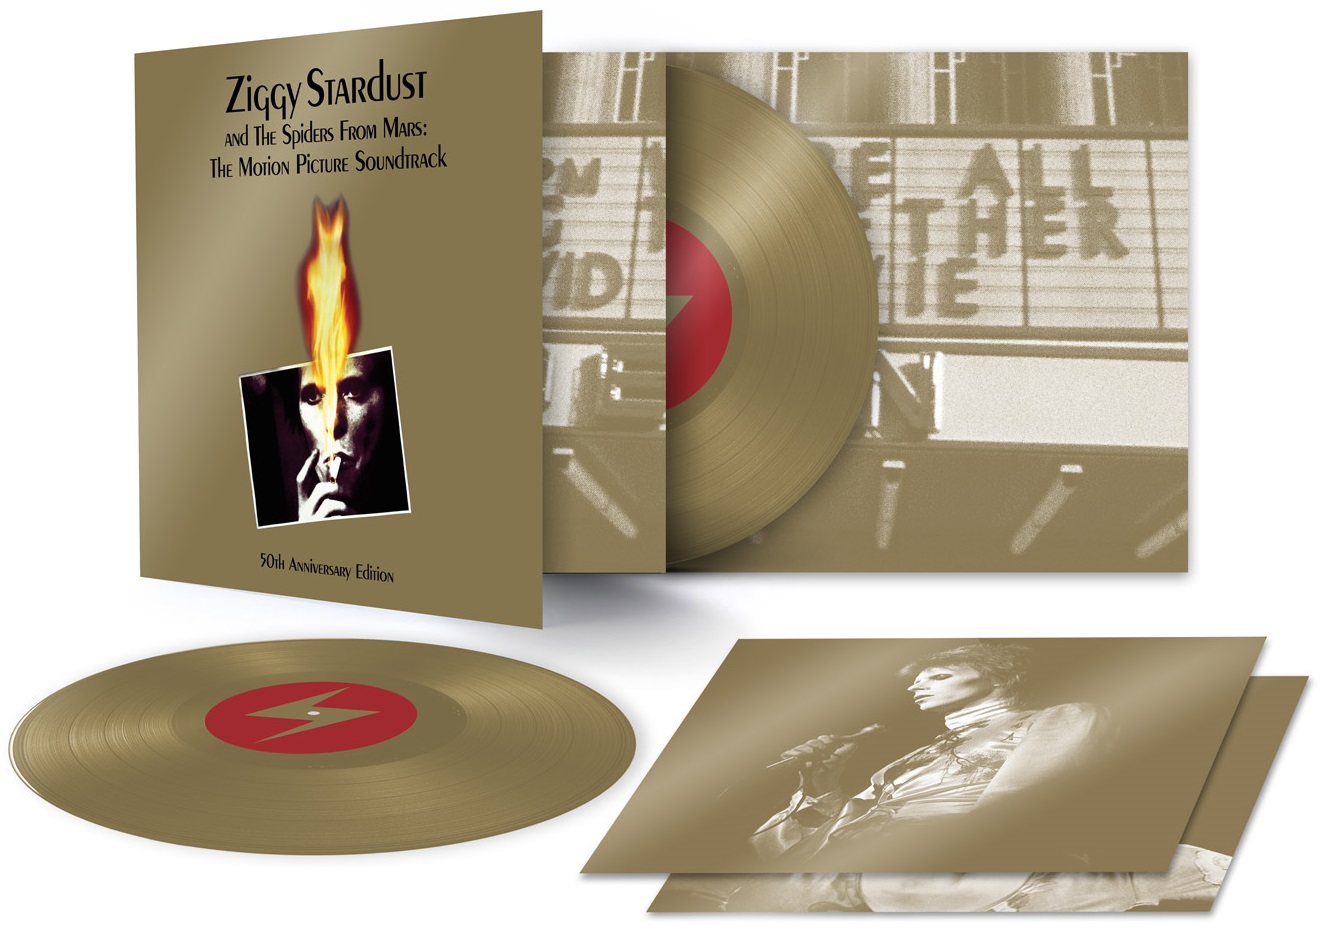 Ziggy Stardust And The Spiders From Mars (The Motion Picture Soundtrack) - Vinyl | David Bowie